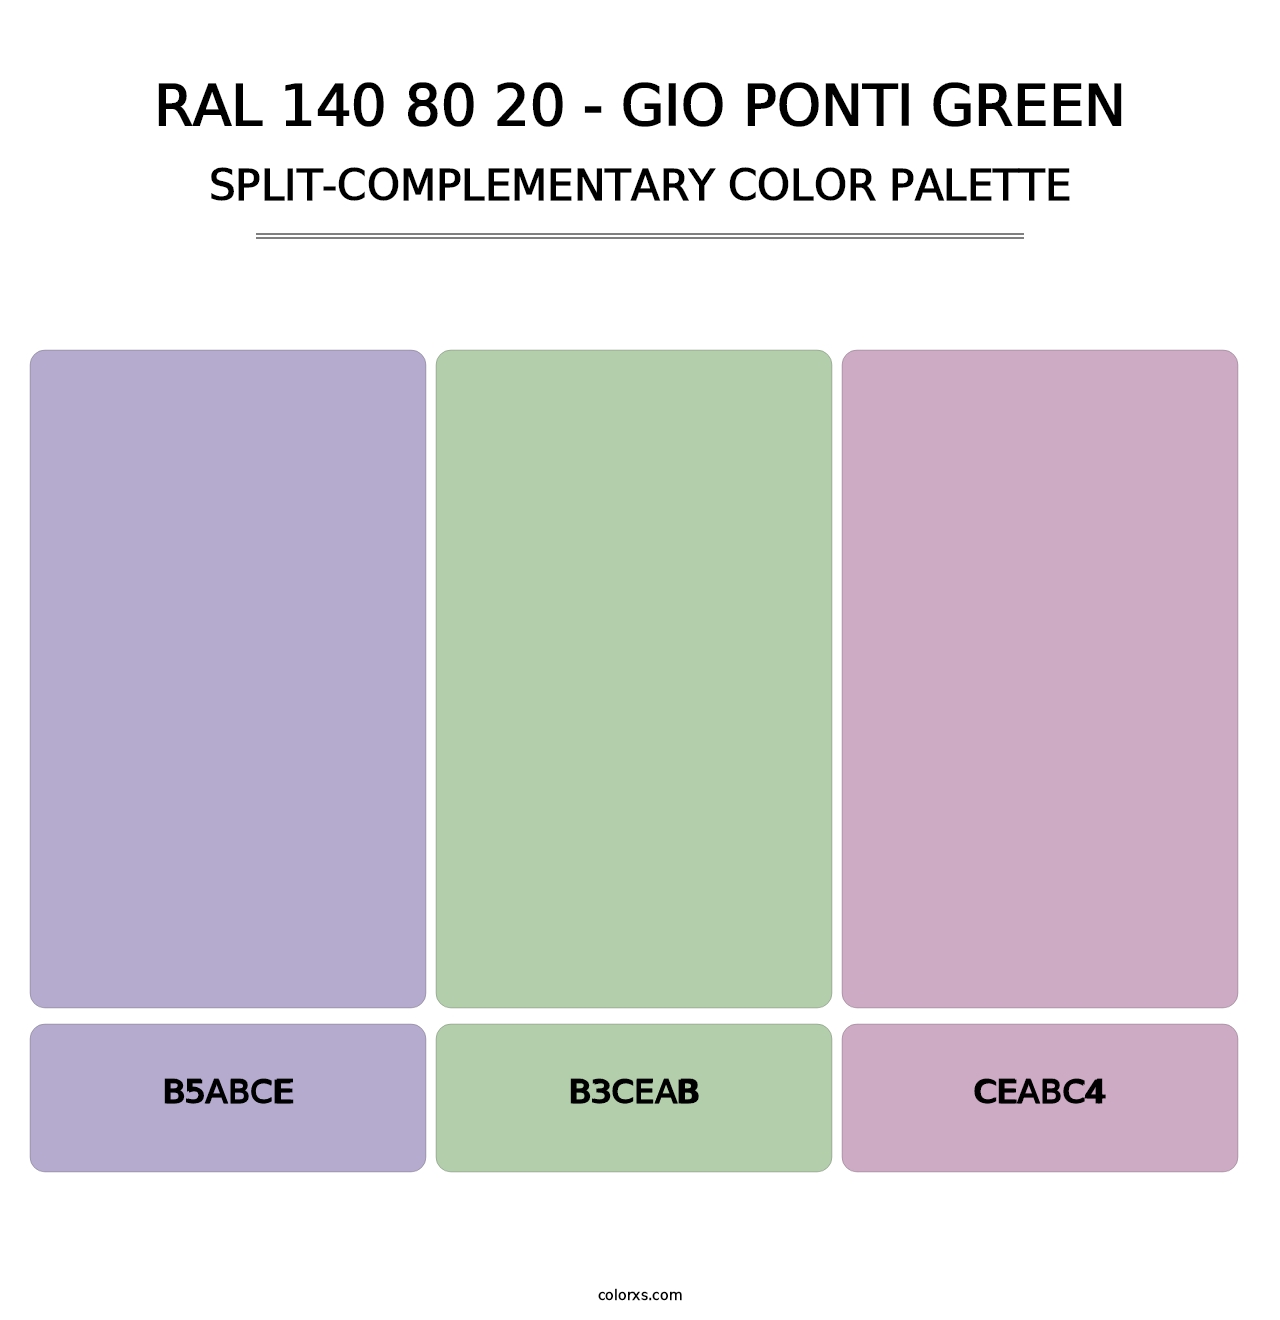 RAL 140 80 20 - Gio Ponti Green - Split-Complementary Color Palette